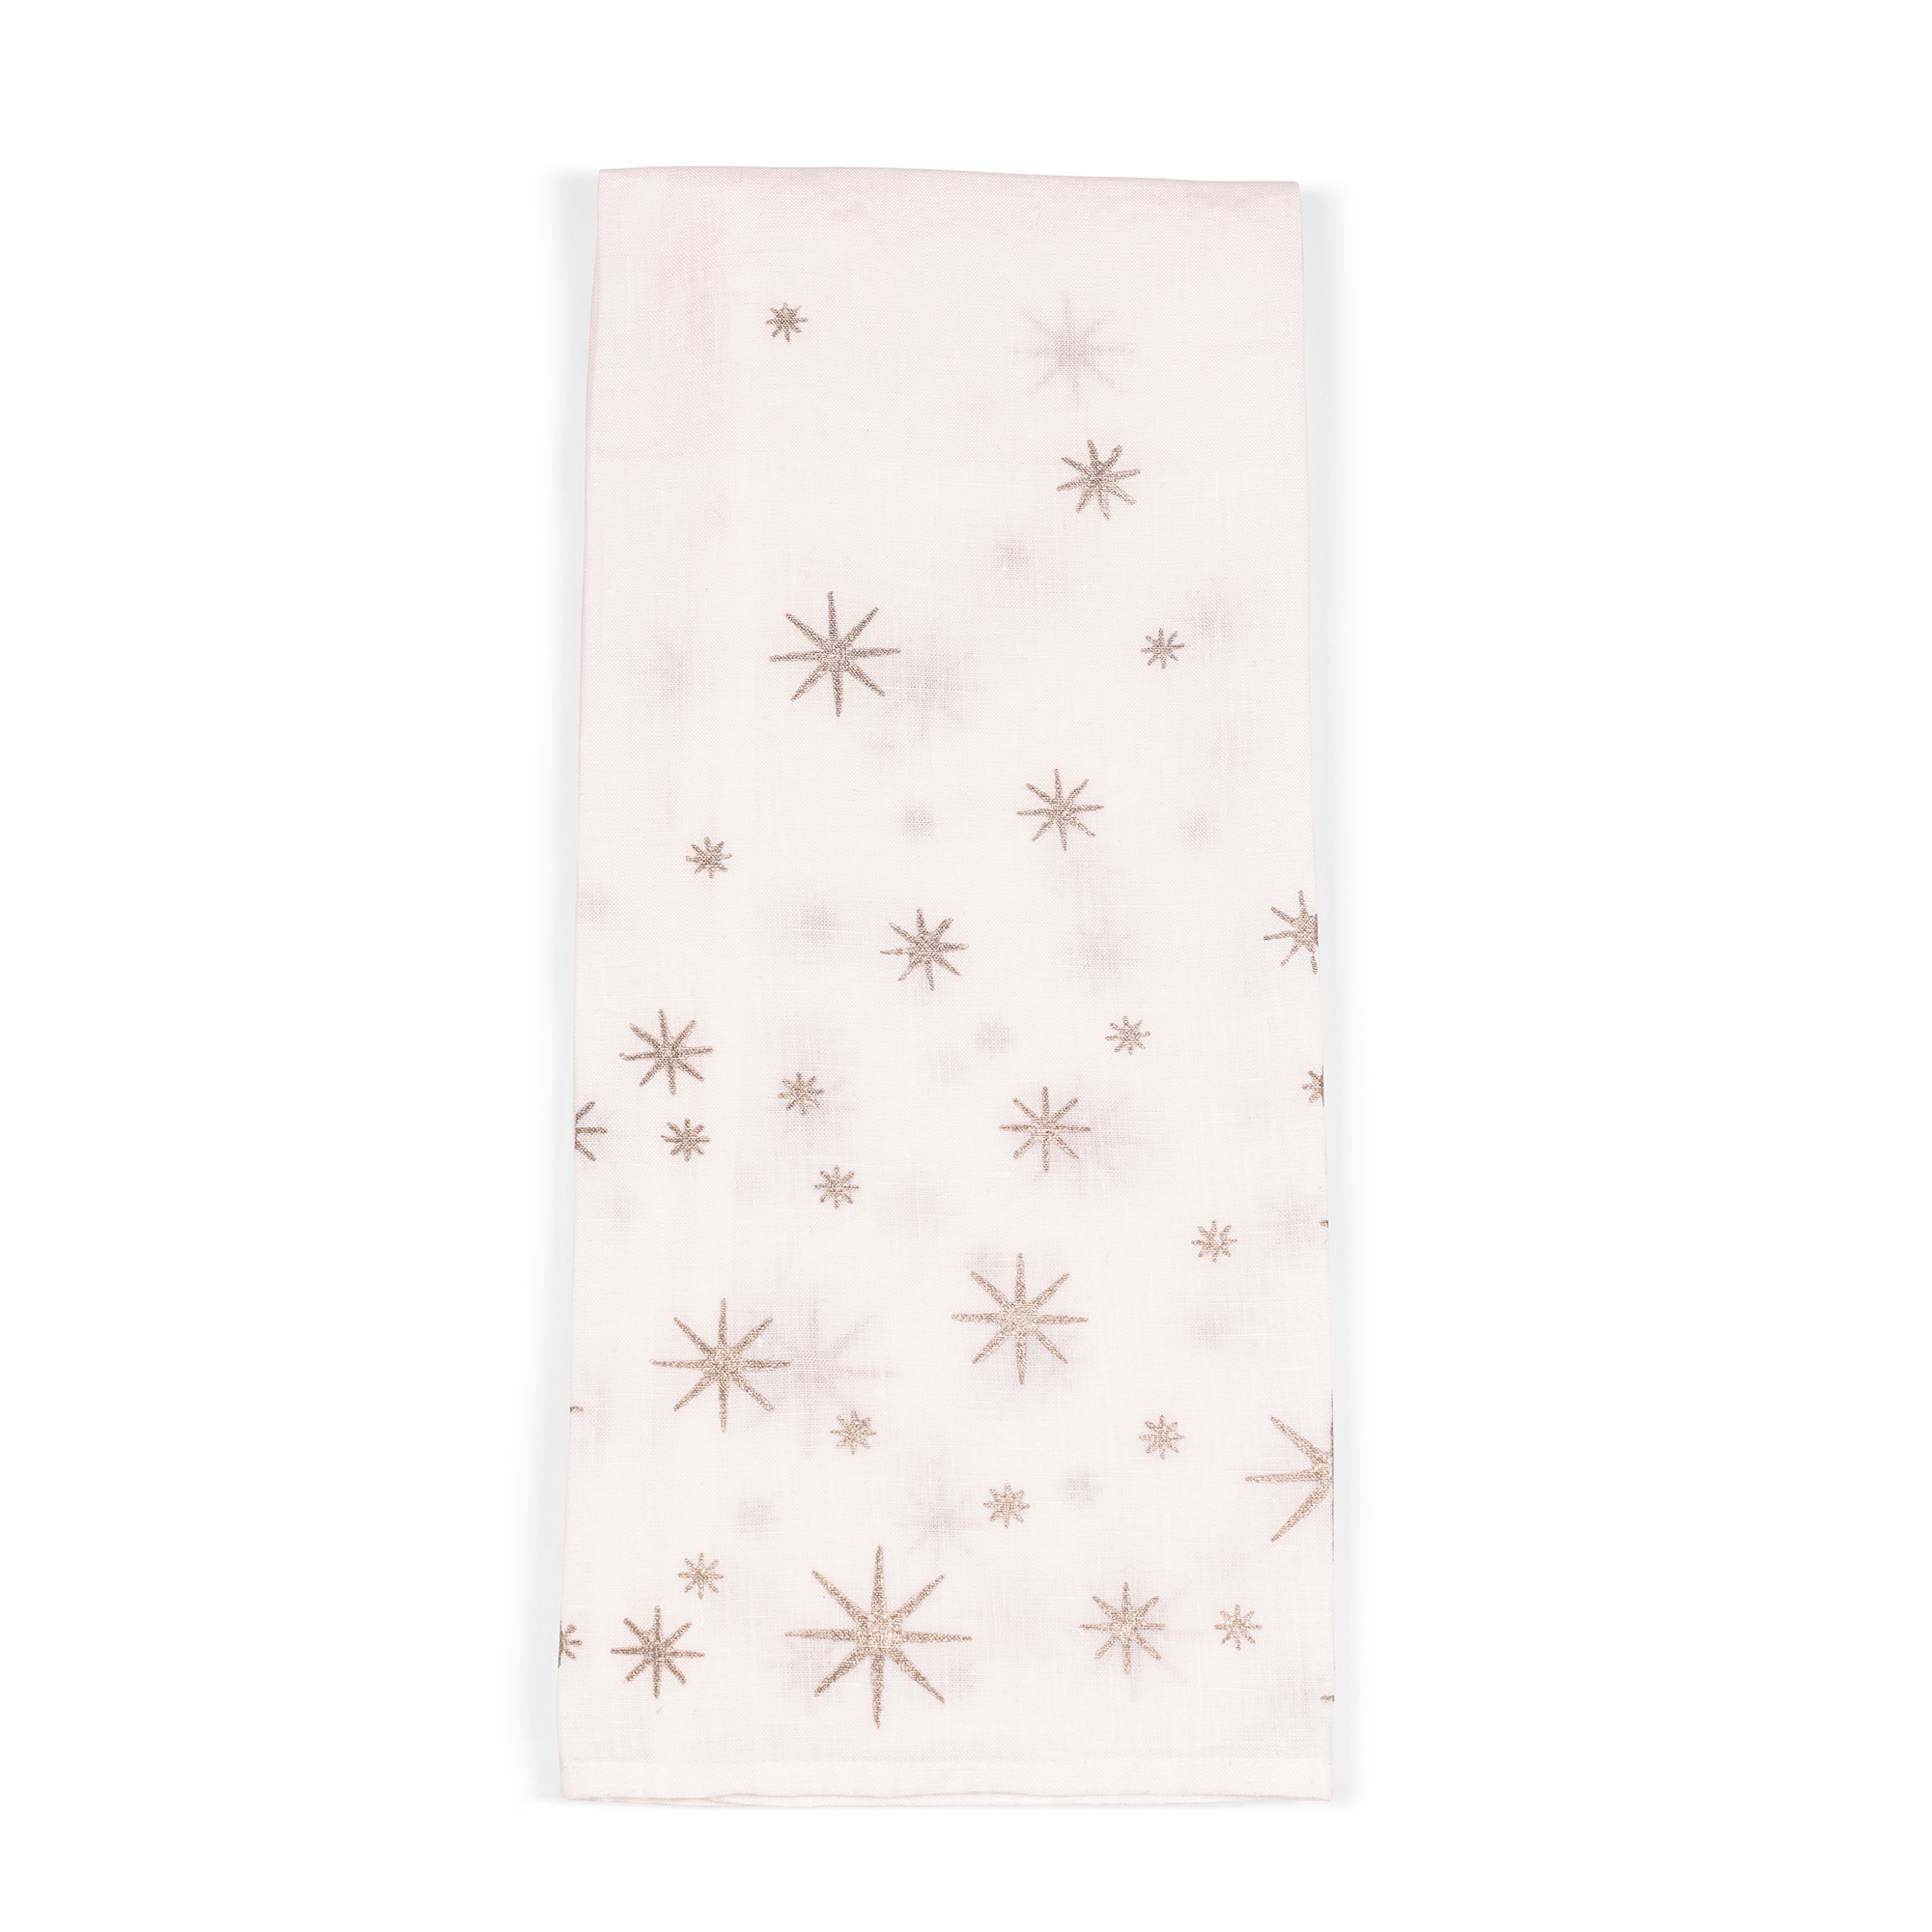 A luxurious white linen tea towel with golden stars, perfect for adding a touch of elegance to your table and kitchen.